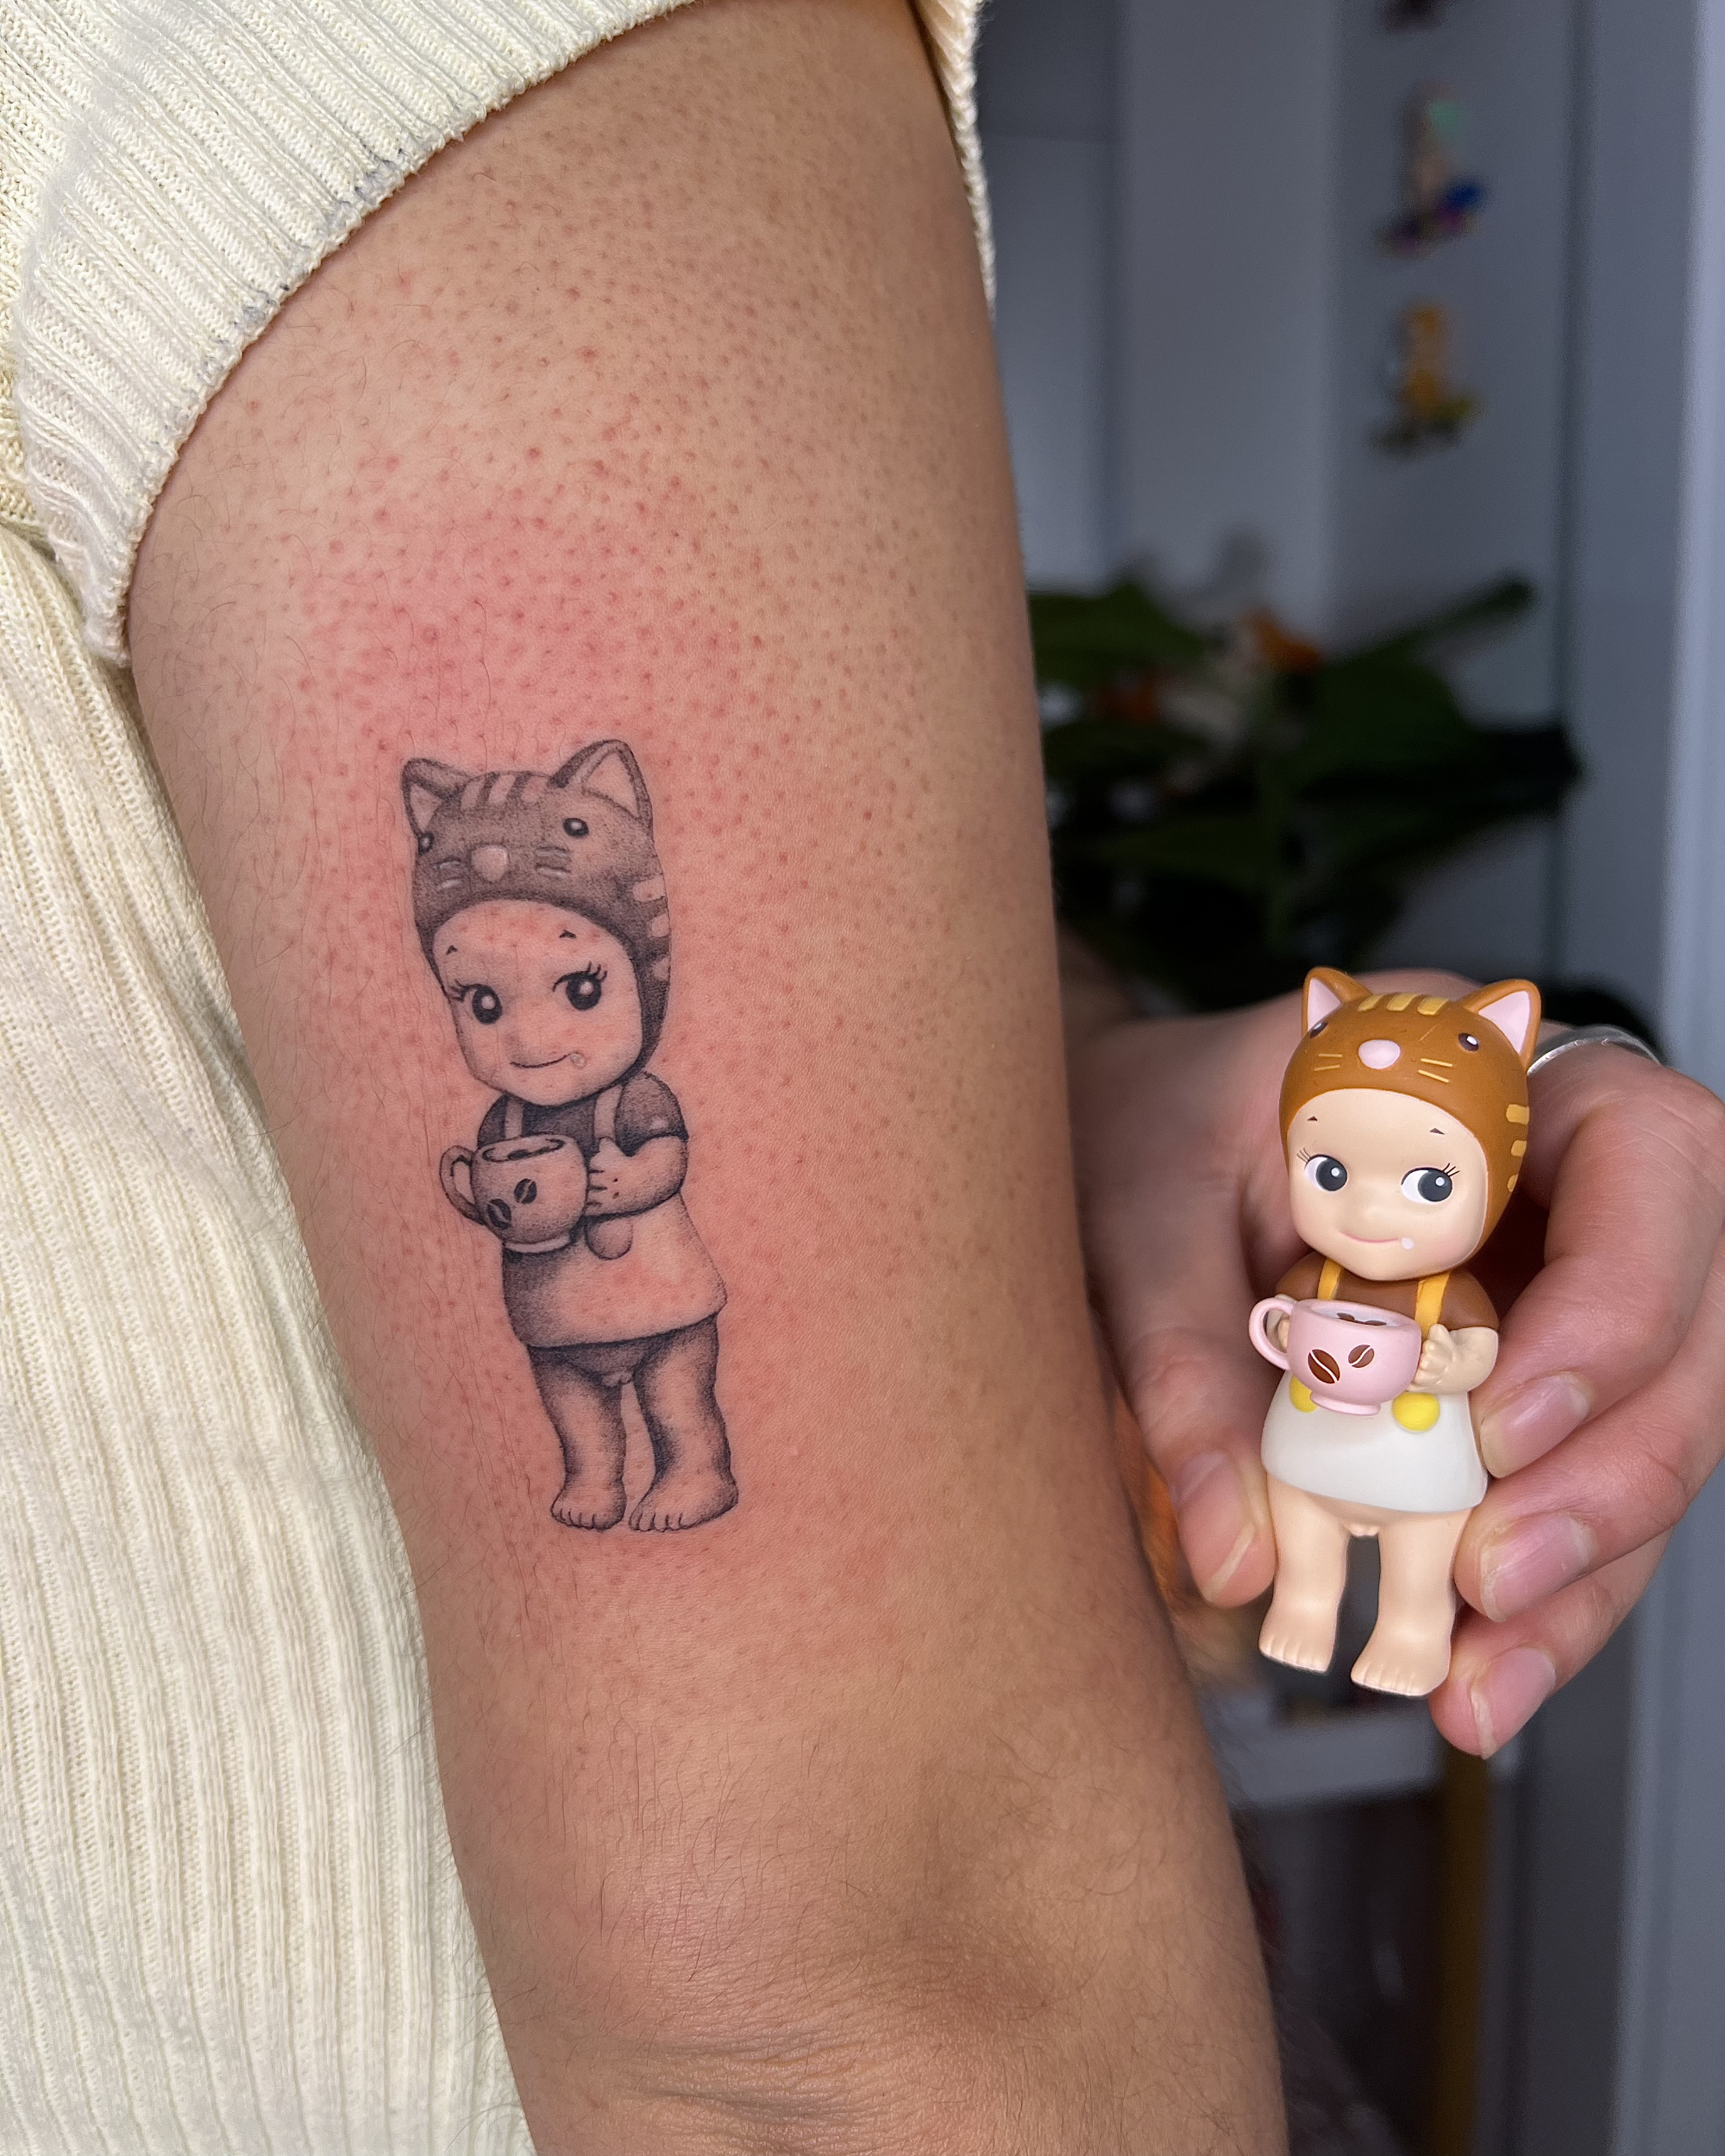 Sonny Angel tattoo by @inktrovert Leigh Archibald